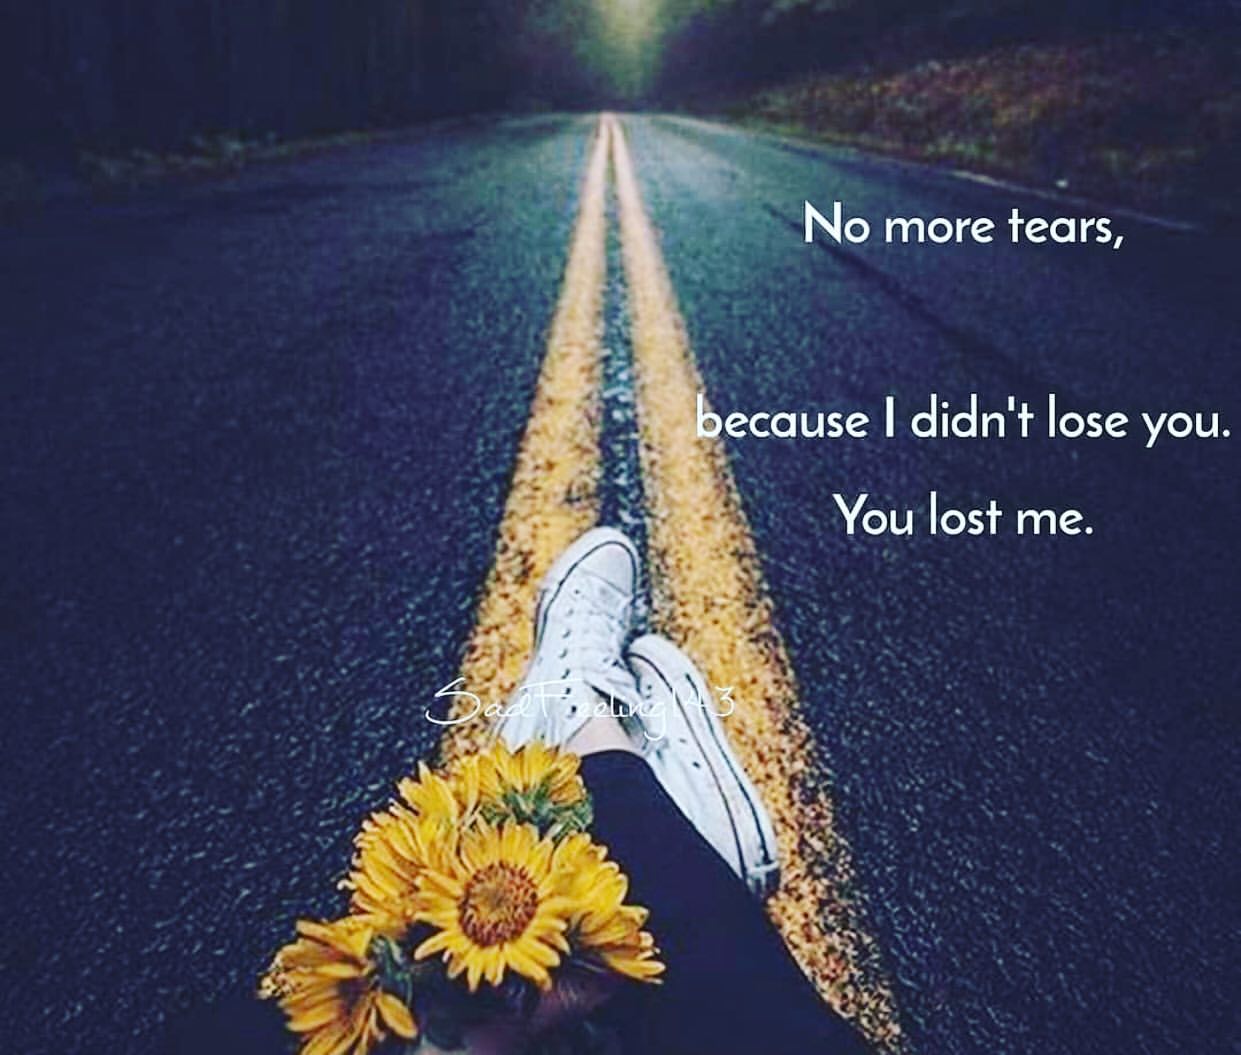 No more tears, because I didn't lose you. You lost me.